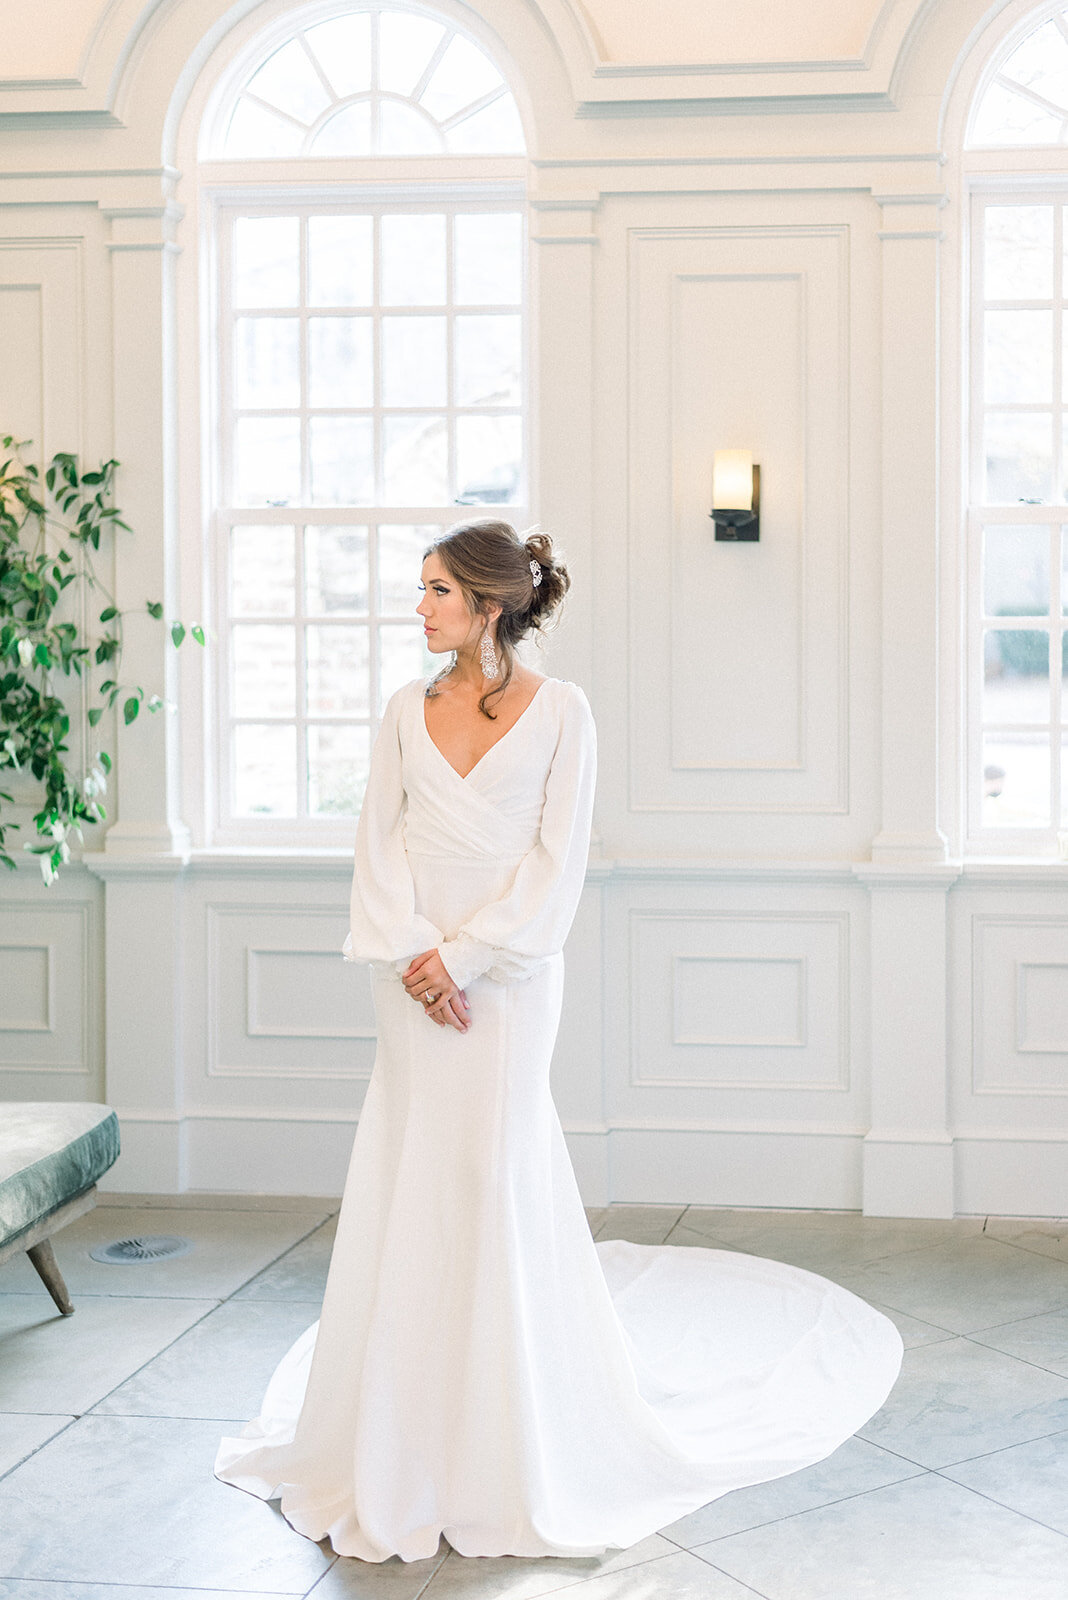 The faux-wrap bodice, bishop sleeves, cathedral train, and clean silhouette create a truly timeless bridal style in Milly.